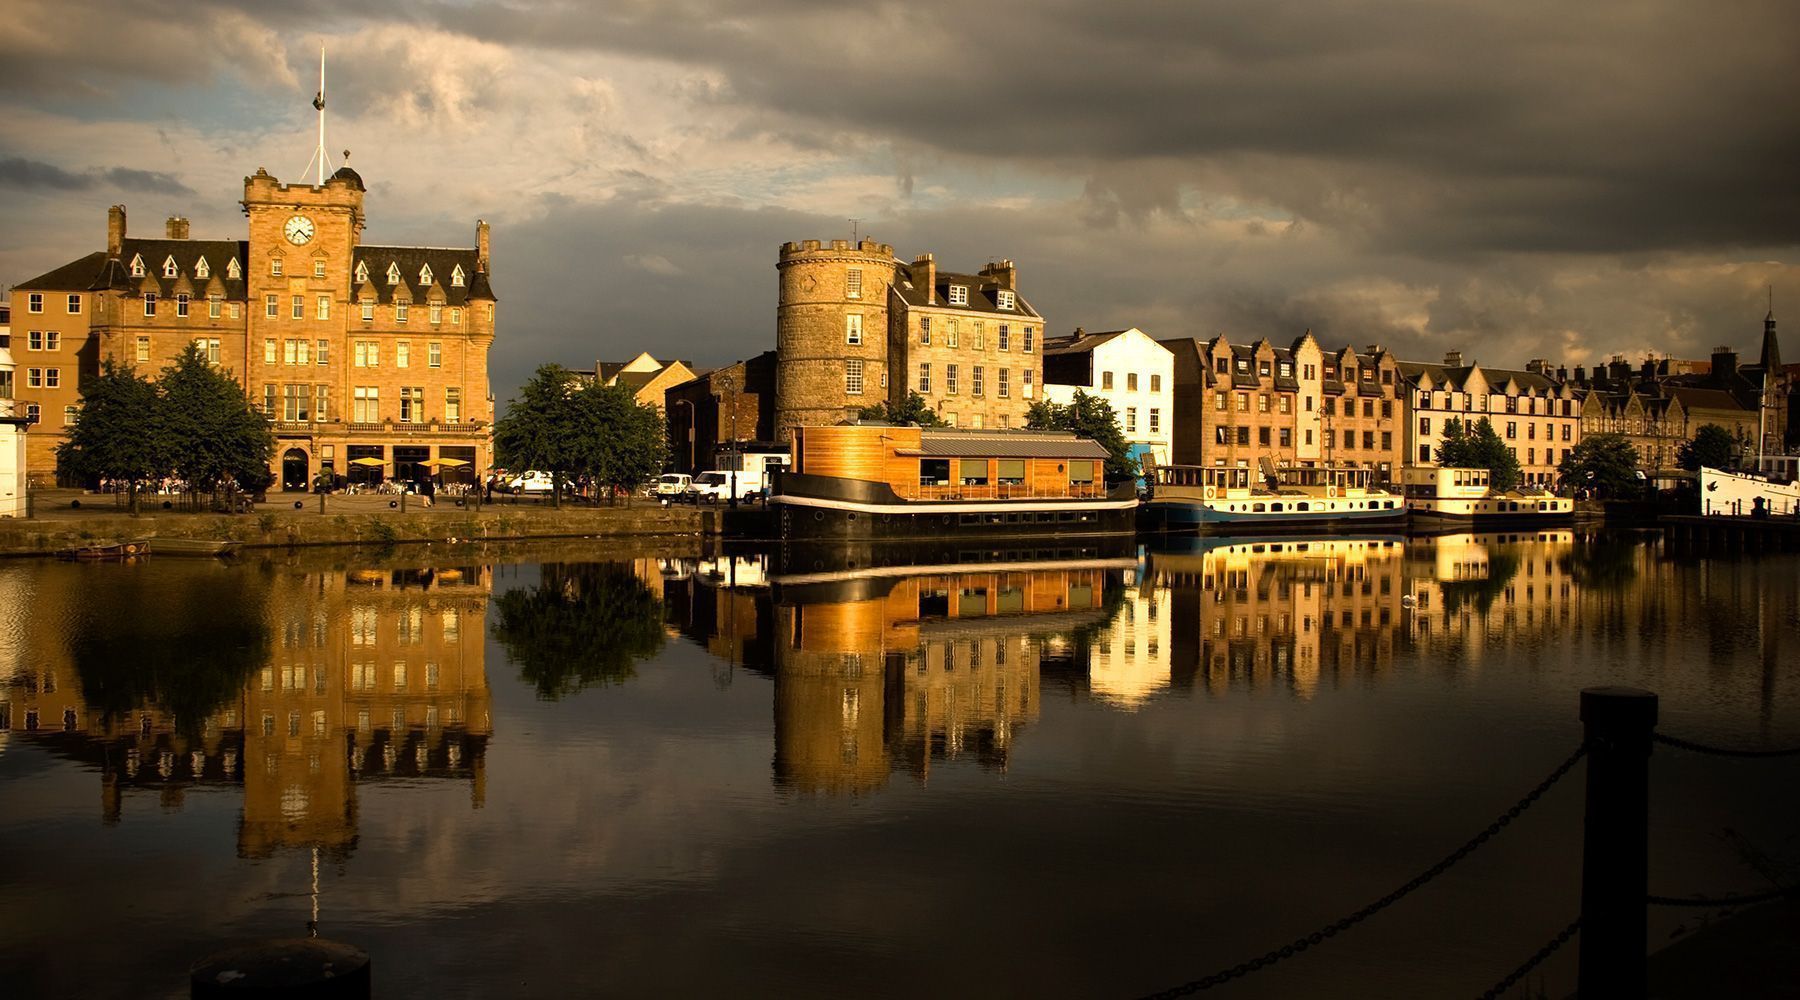 Leith harbour